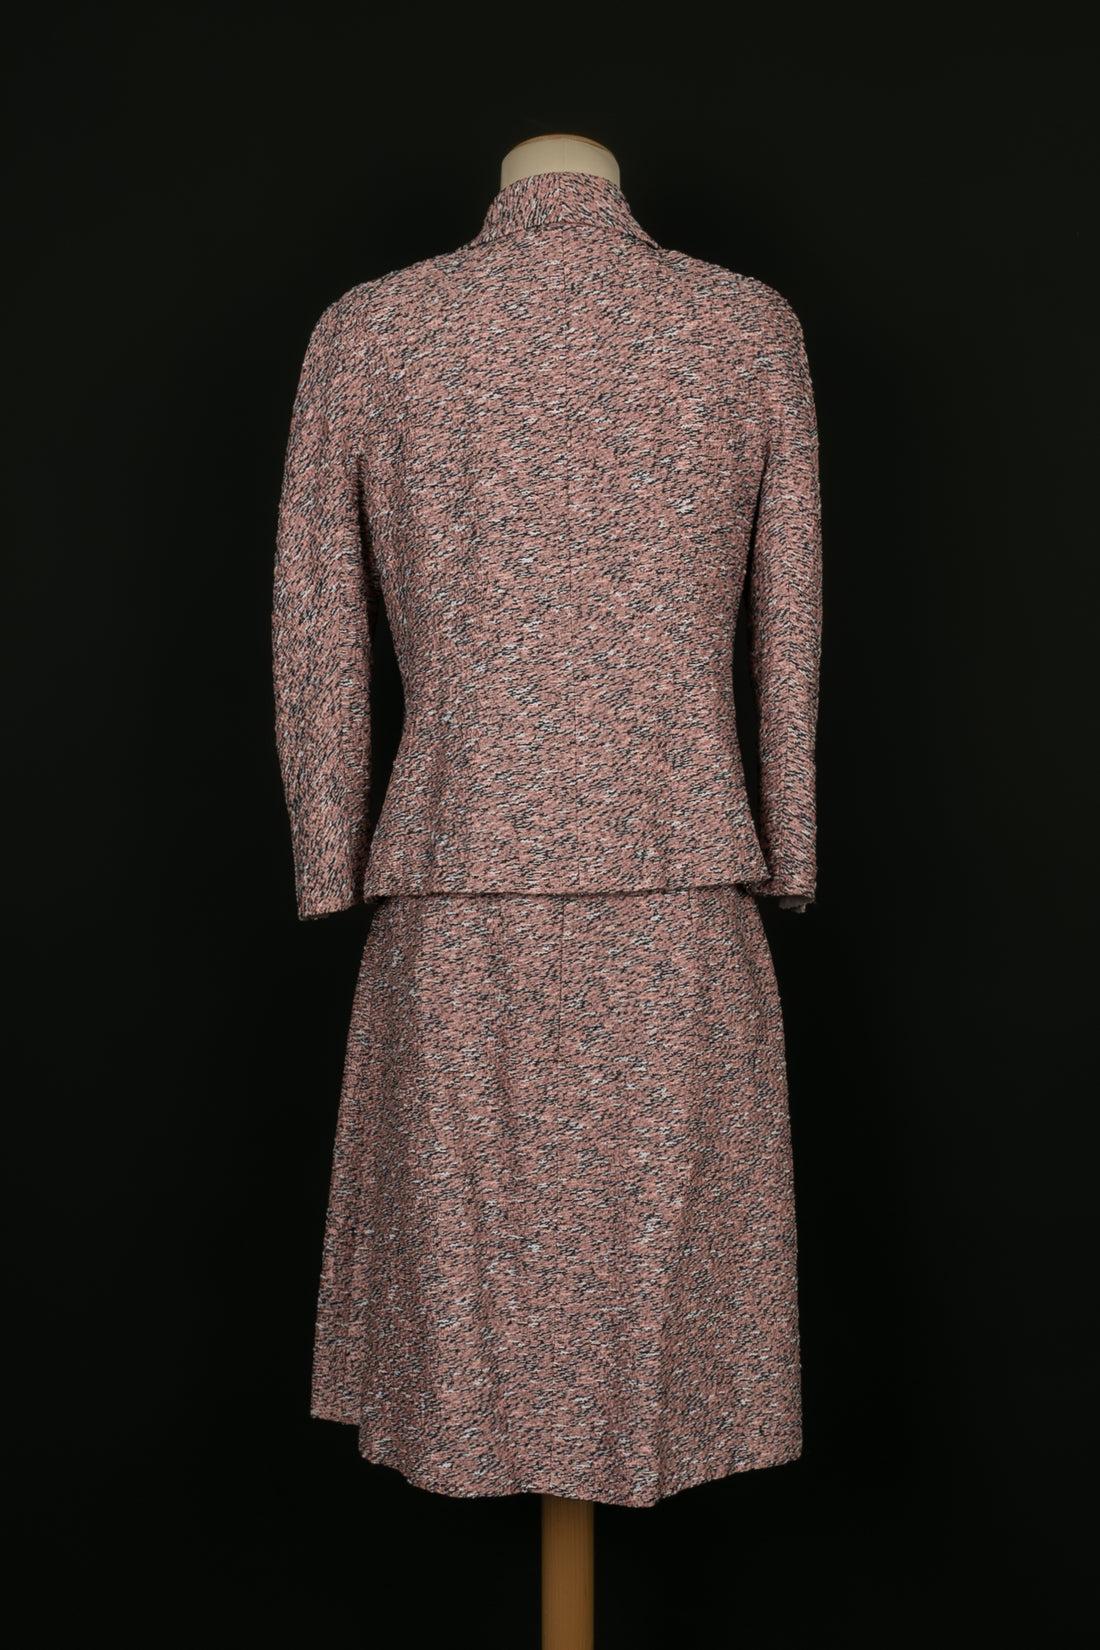 Chanel - (Made in France) Outfit composed of a tweed jacket and skirt in shades of pink. Size 44FR.

Additional information: 
Dimensions: Jacket: Shoulder width: 44 cm, Chest: 45 cm, Sleeve length: 50 cm, Length: 57 cm
Skirt: Waist: 41 cm, Hips: 53